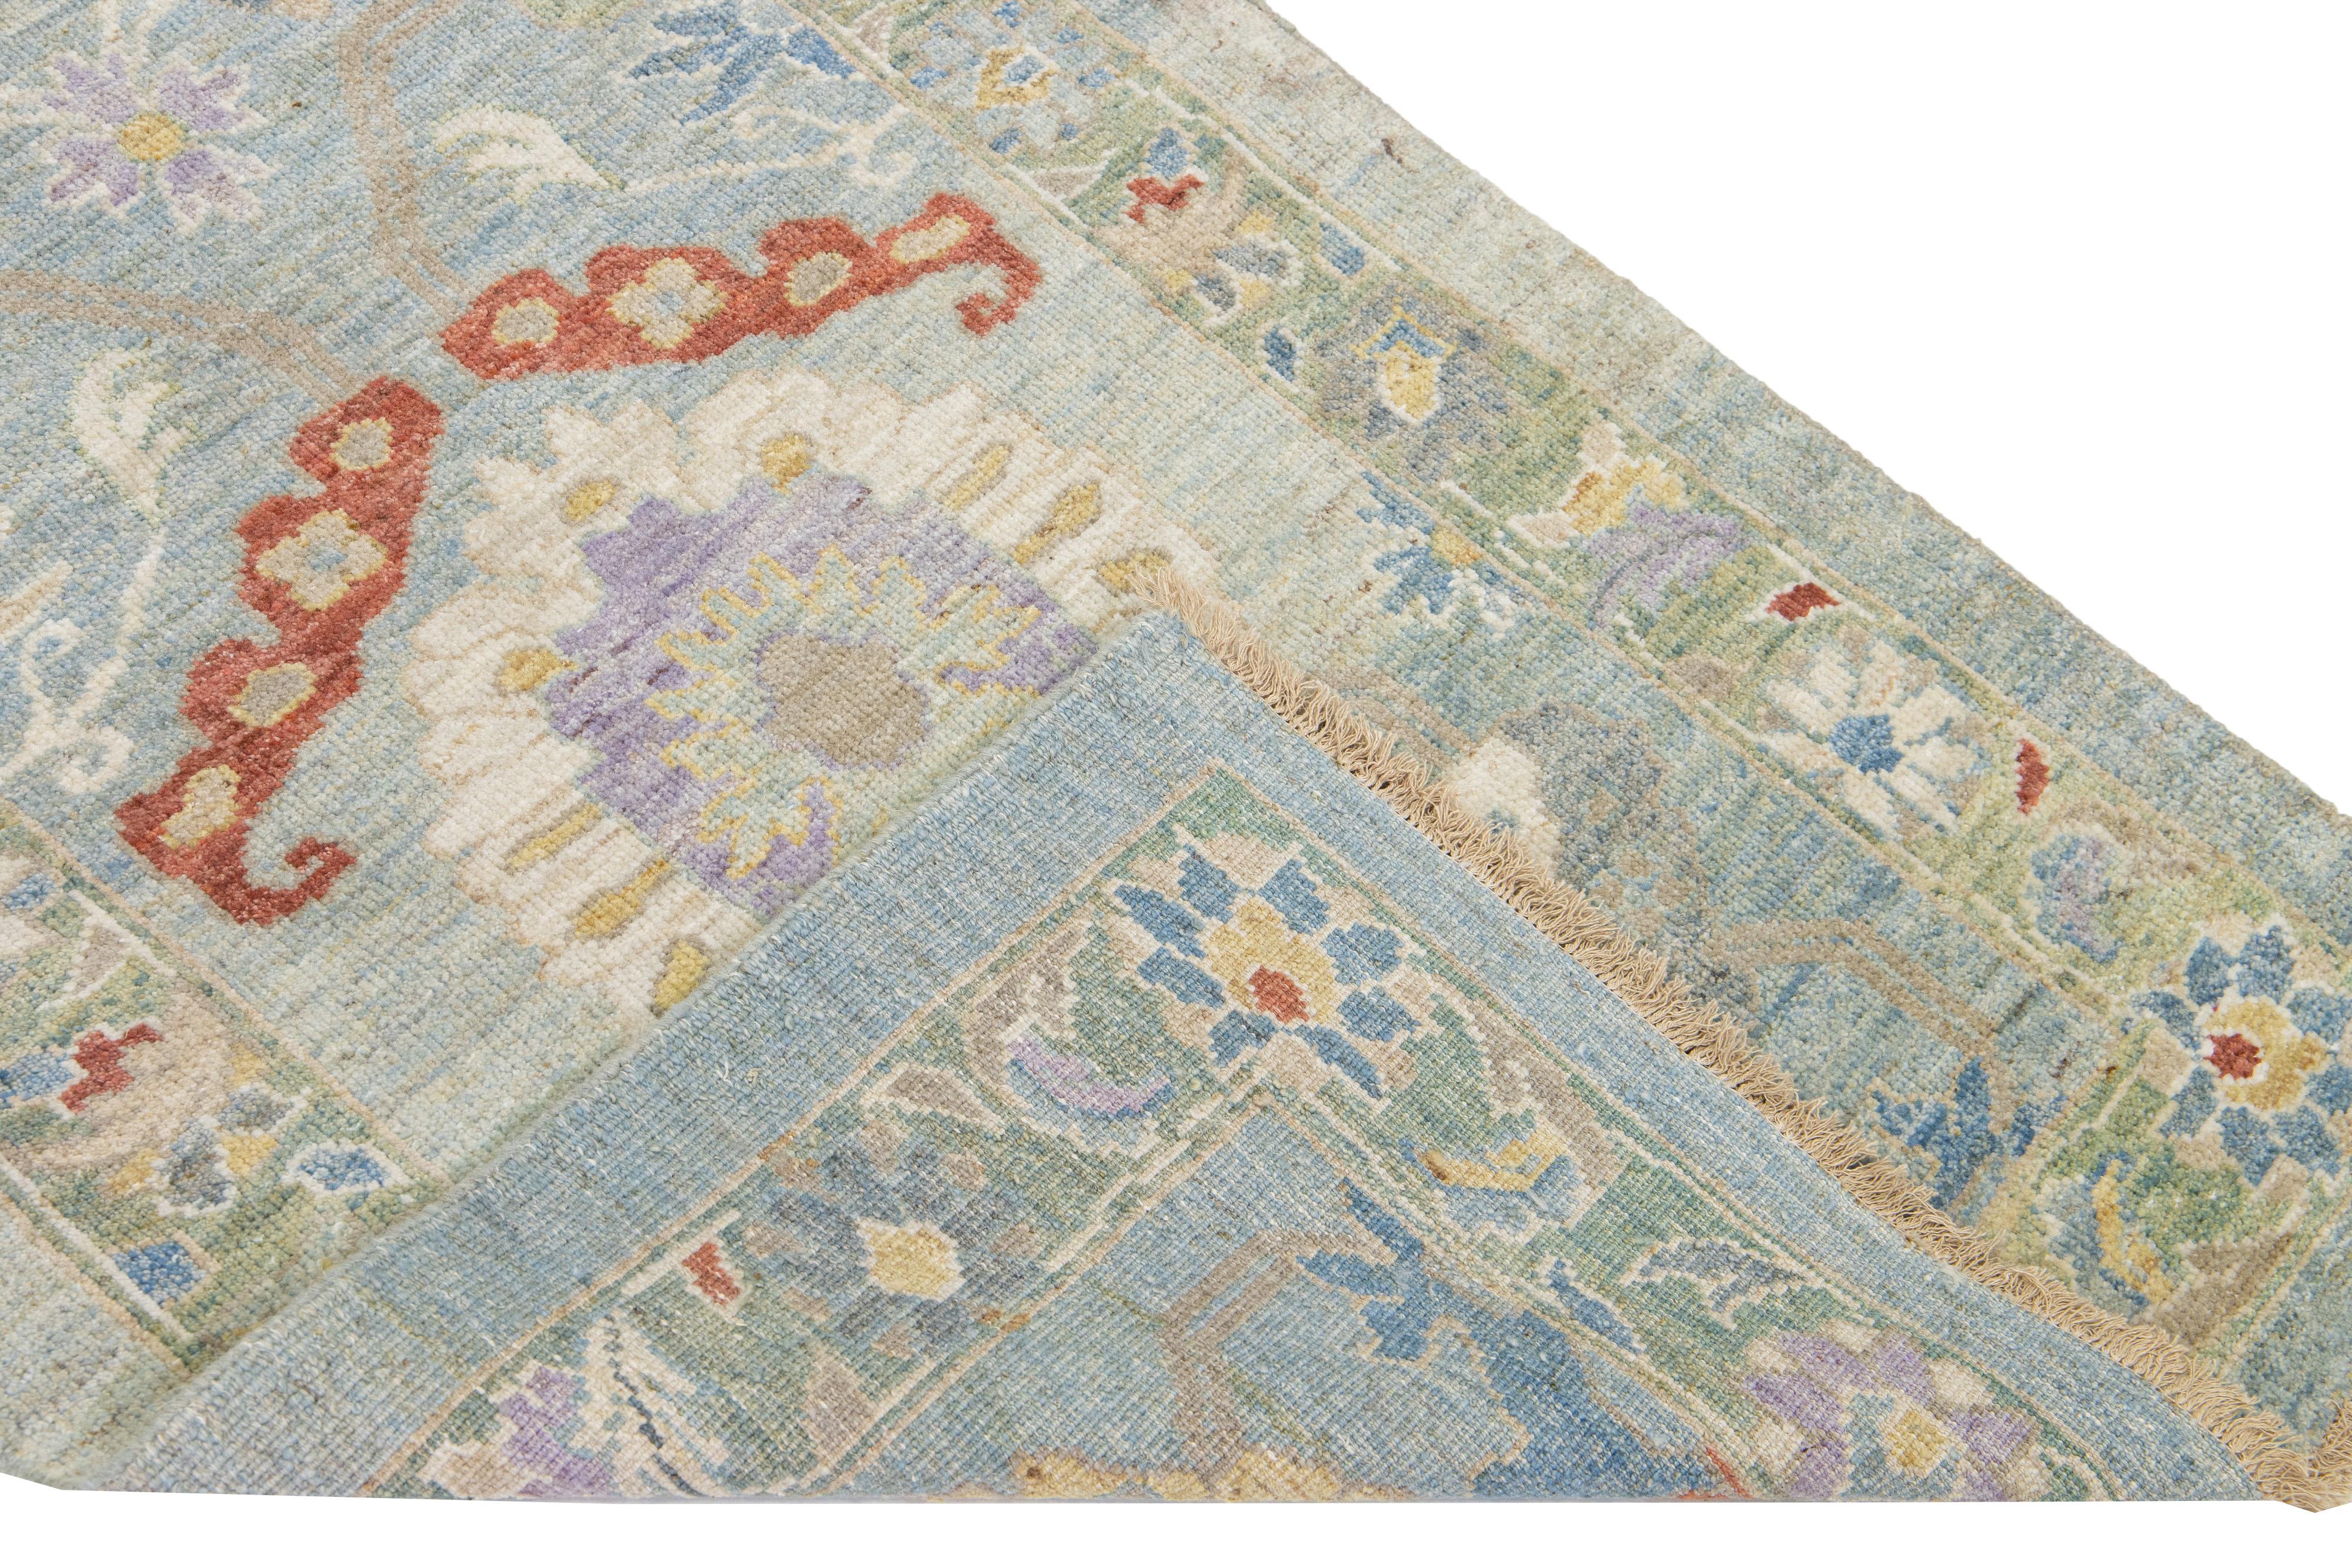 Modern Mahal hand-knotted wool runner with a blue field. This piece has a green-designed frame and multicolor accent colors that features a gorgeous all-over floral design.

This rug measures: 3'2